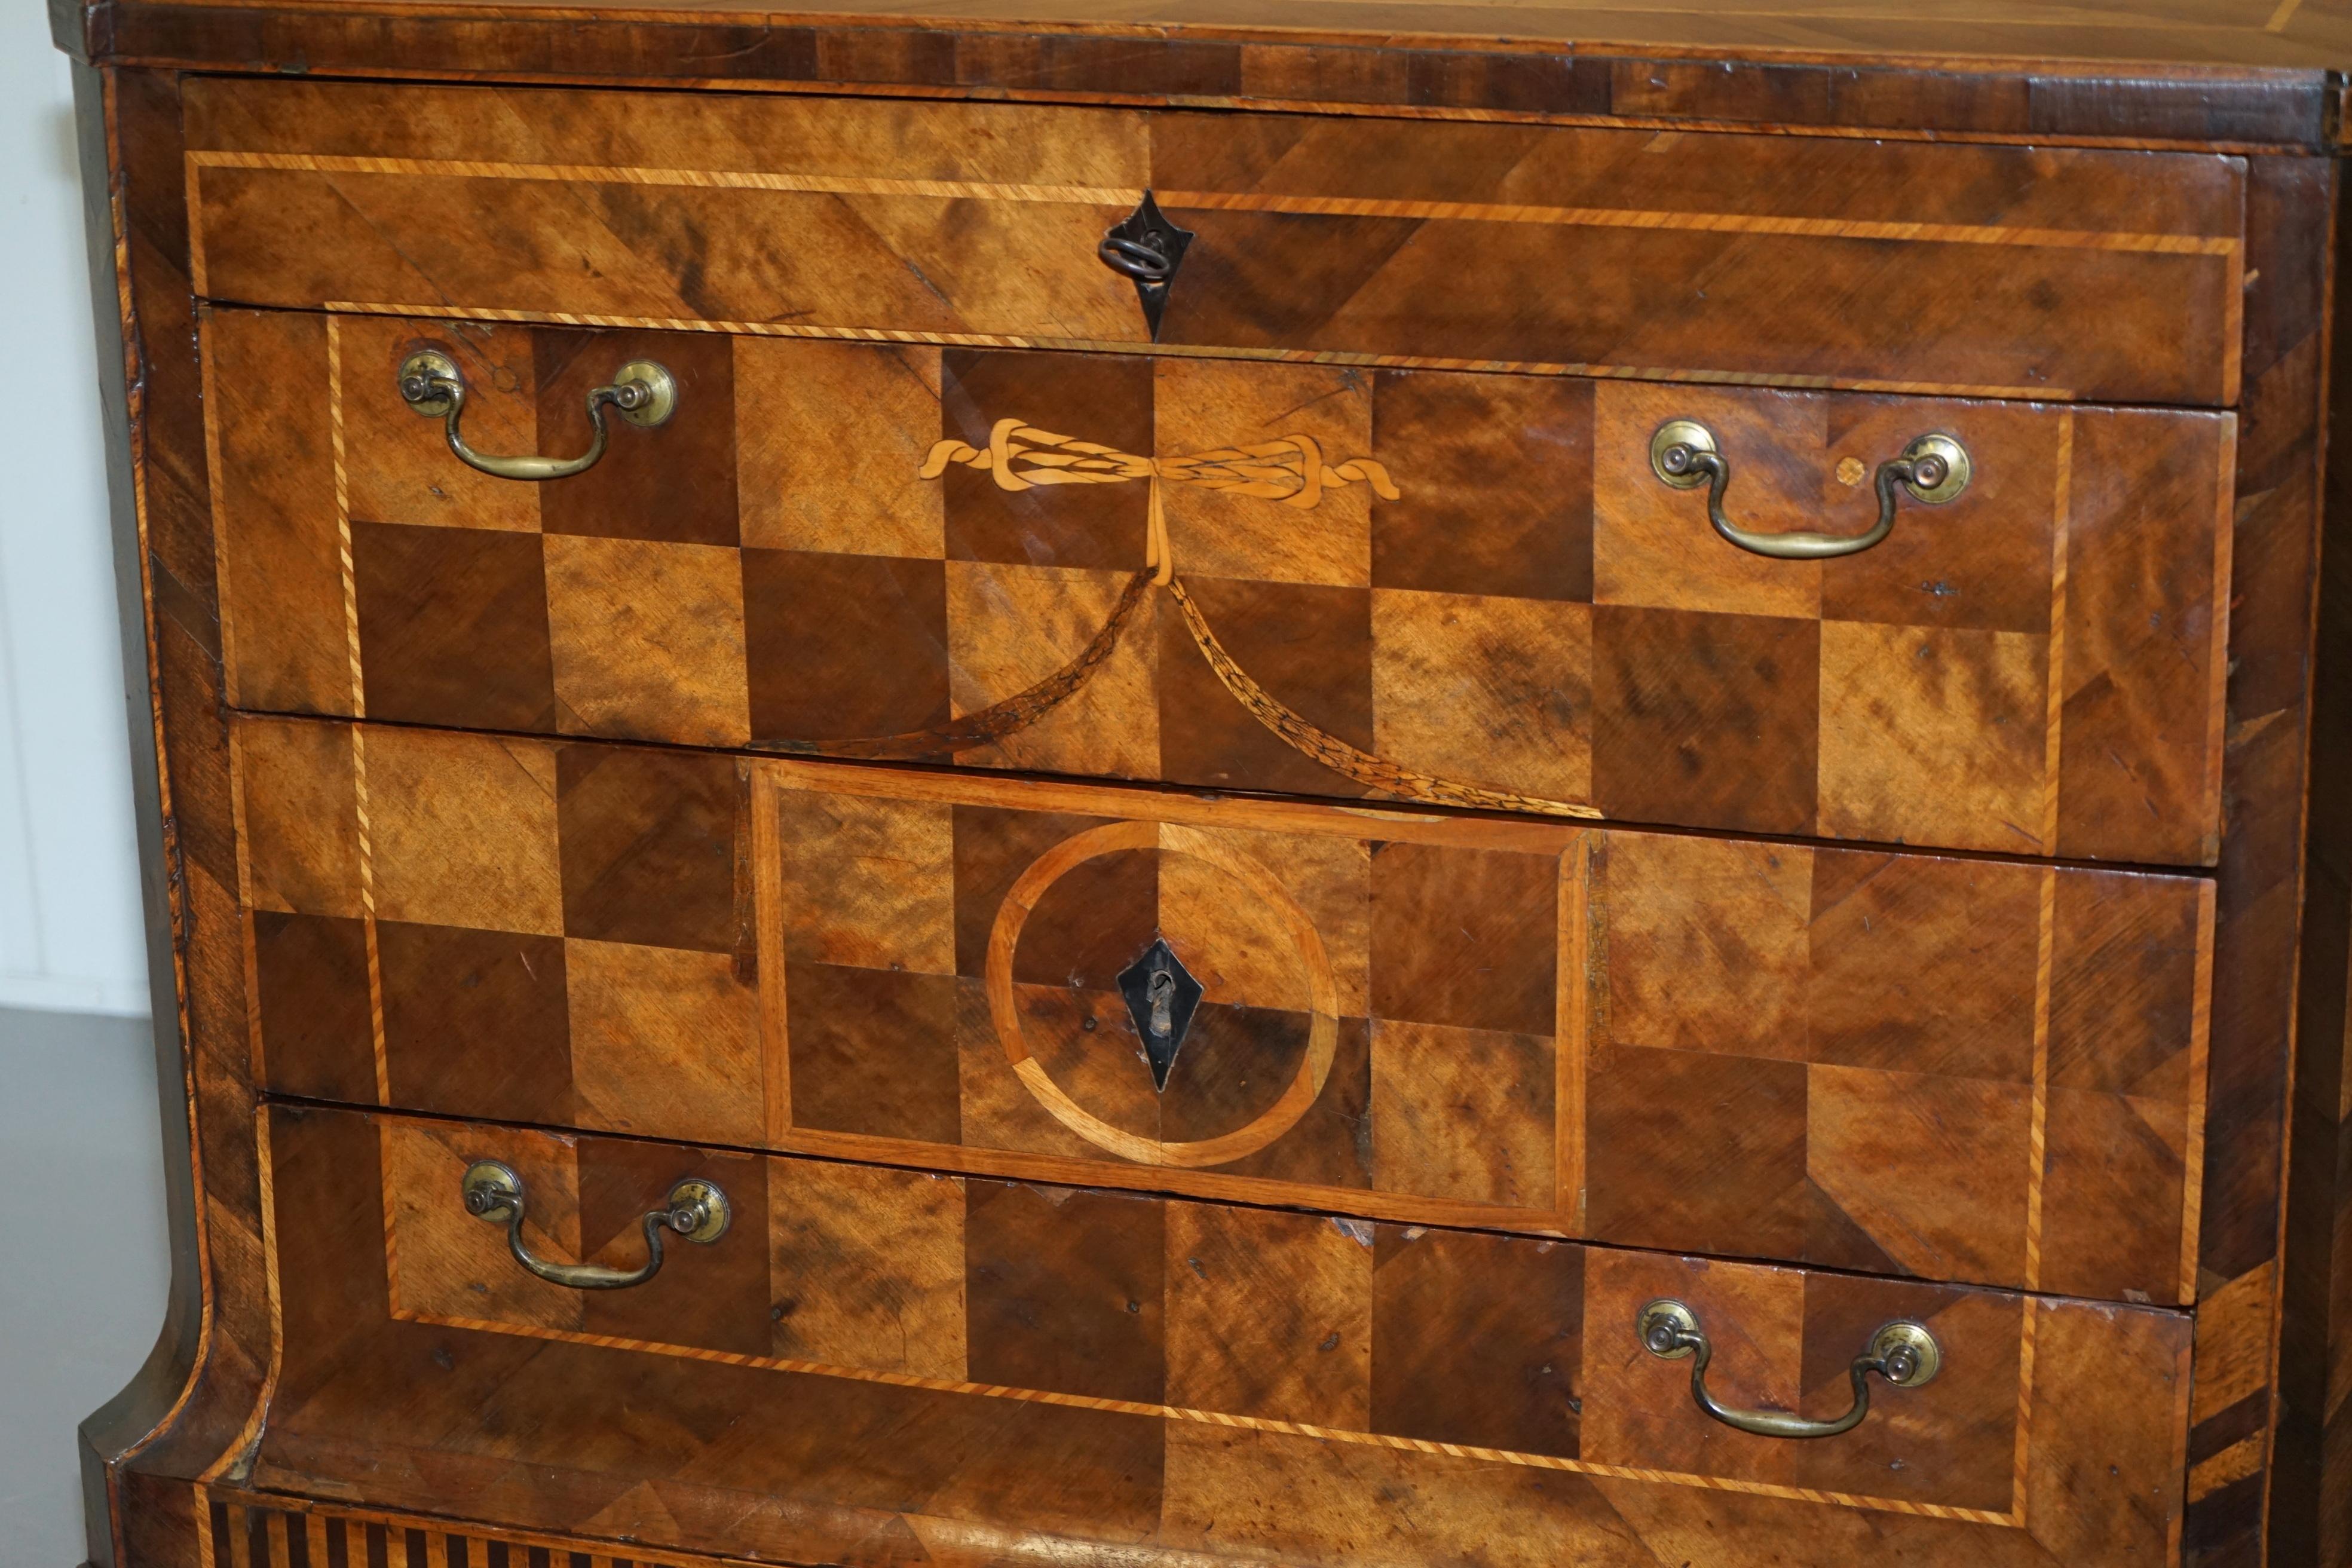 Rare circa 1780 Continental Parquetry Marquetry Inlaid Commode Chest of Drawers For Sale 2